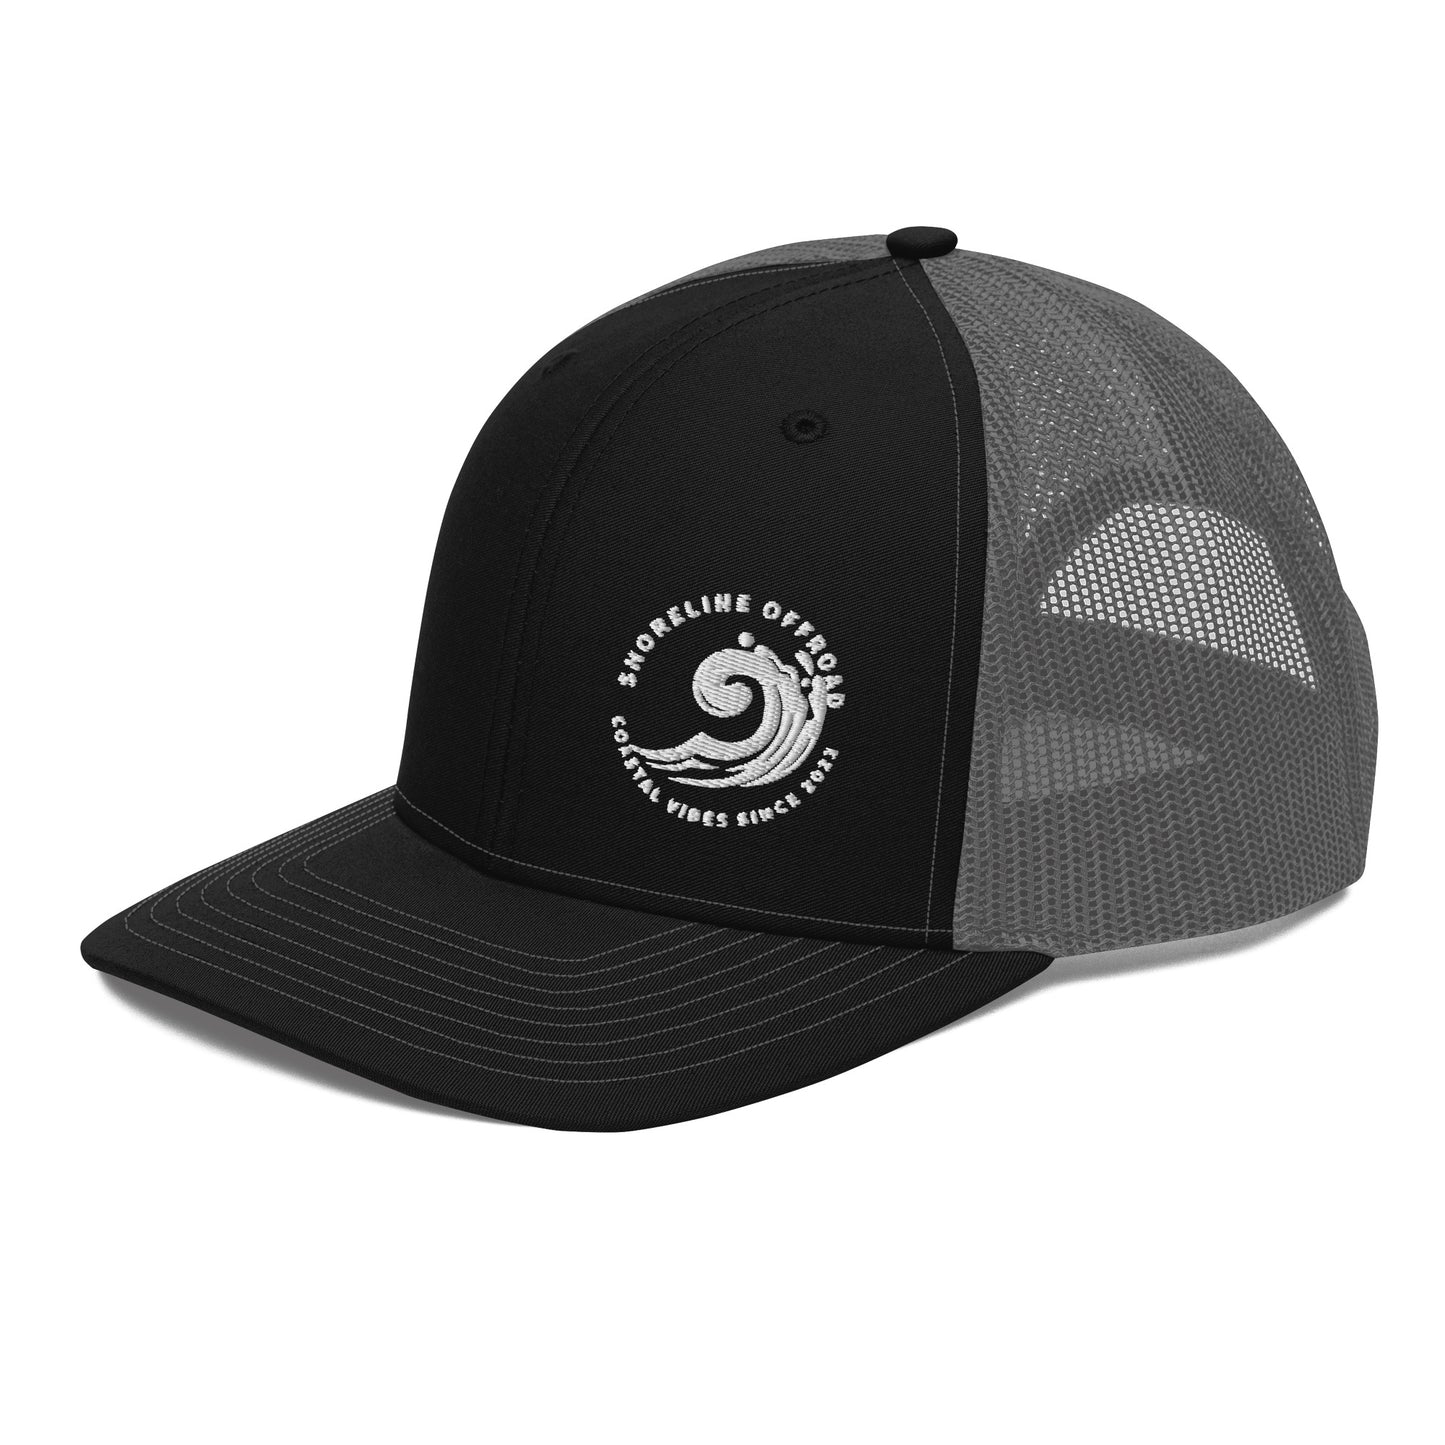 a black and grey hat with a white logo